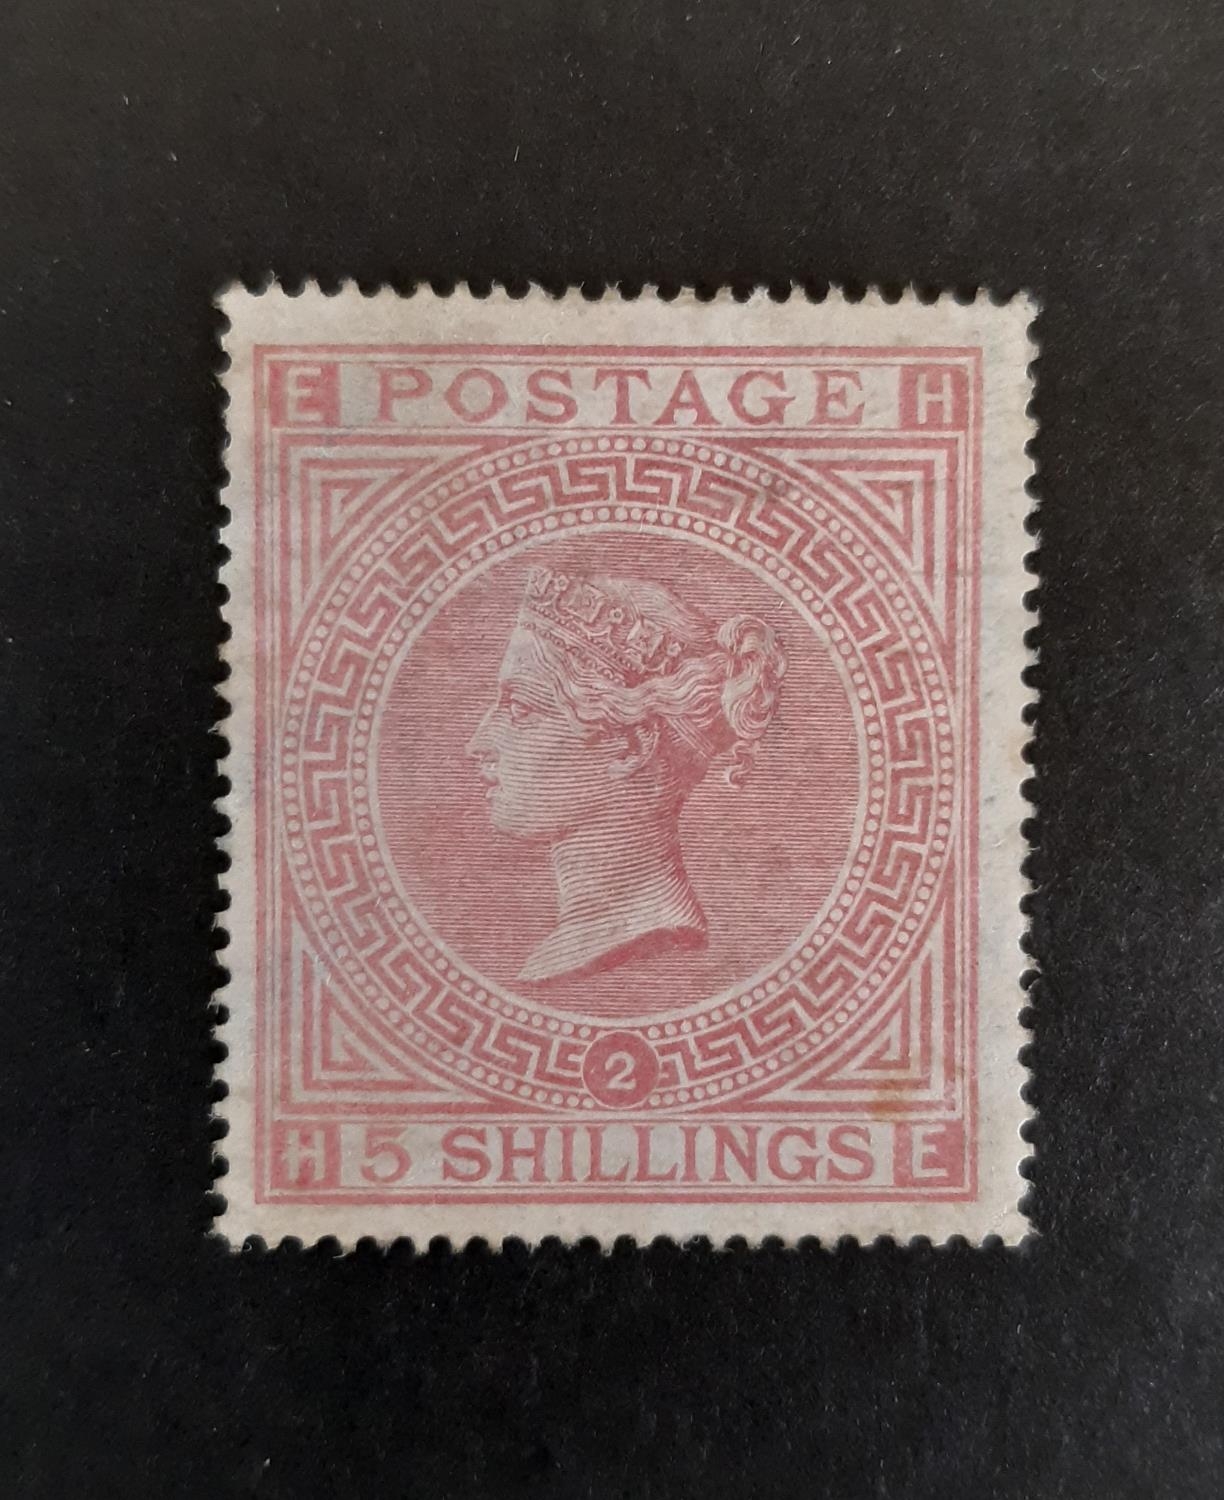 131- 1874 QV SG127 5/- pale rose pl2, WMK Maltese Cross clearly visible. A fresh example of this